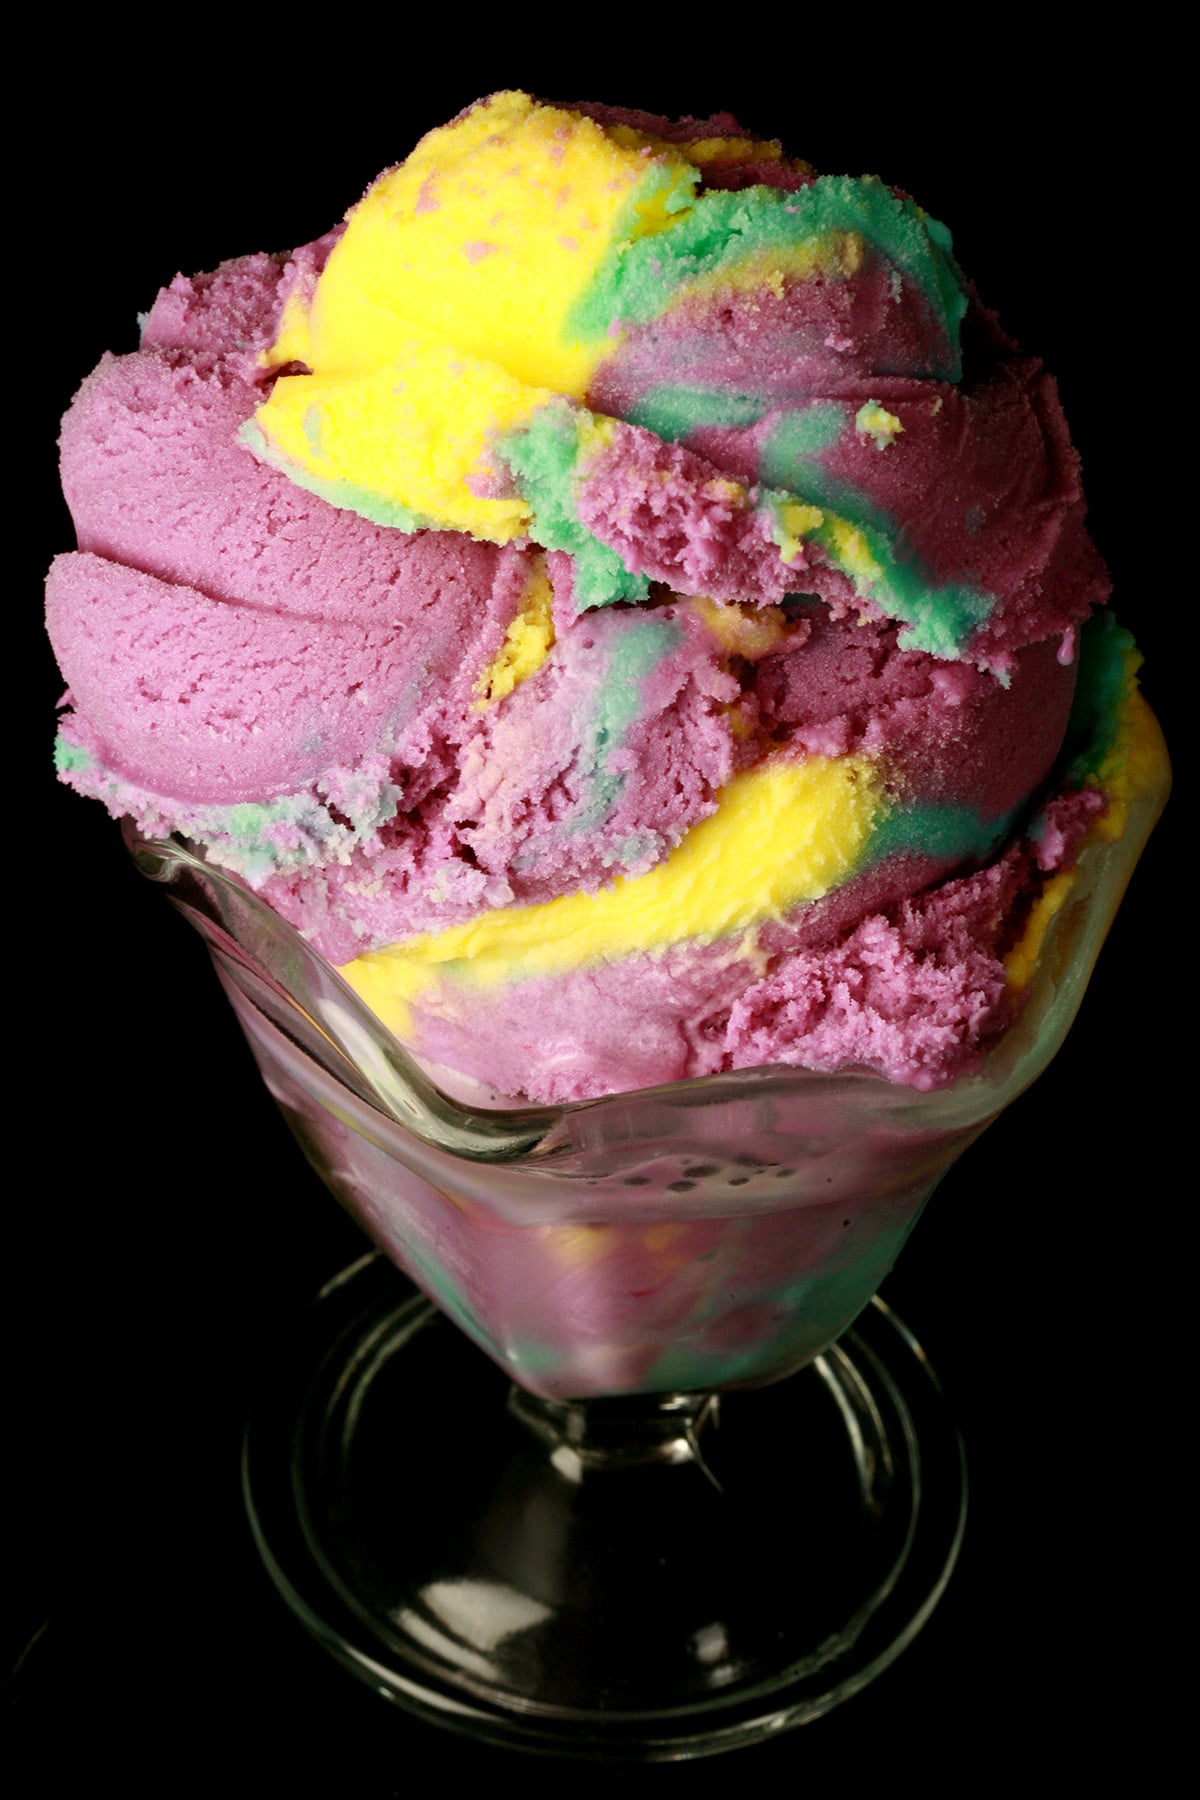 A fluted glass dessert bowl is stacked high with scoops of homemade moon mist ice cream - purple, blue, and yellow marbled ice cream.